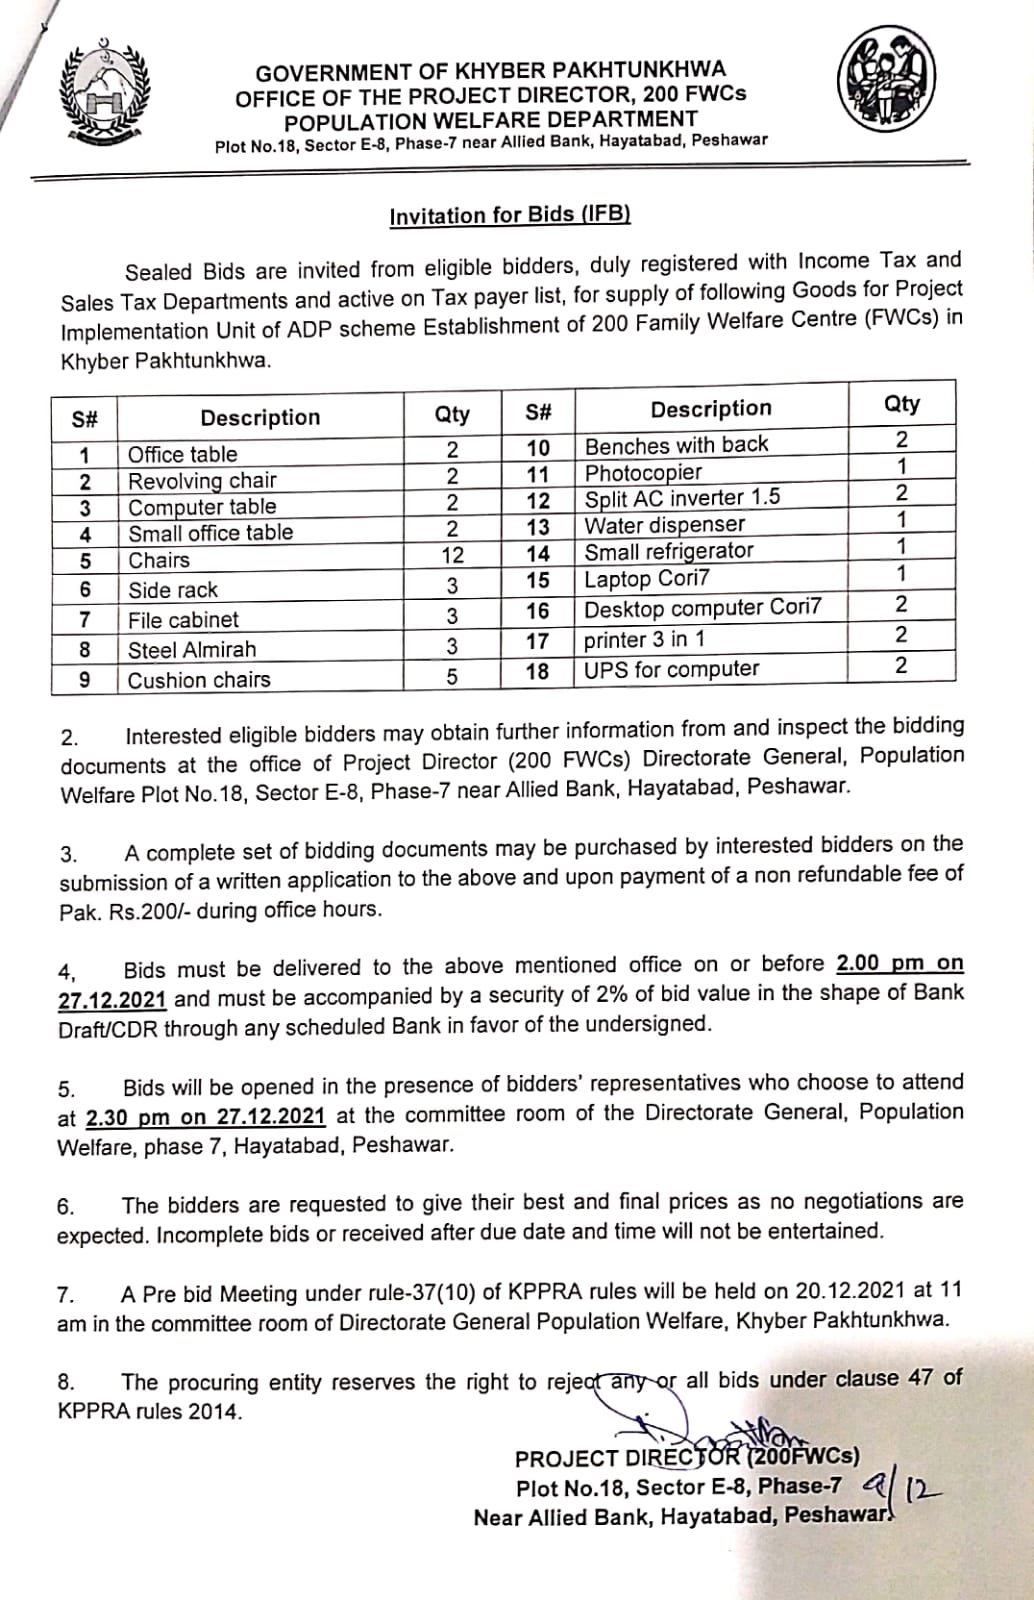 invitation for bids for purchase of goods under ADP scheme establishment of 200 FWCs